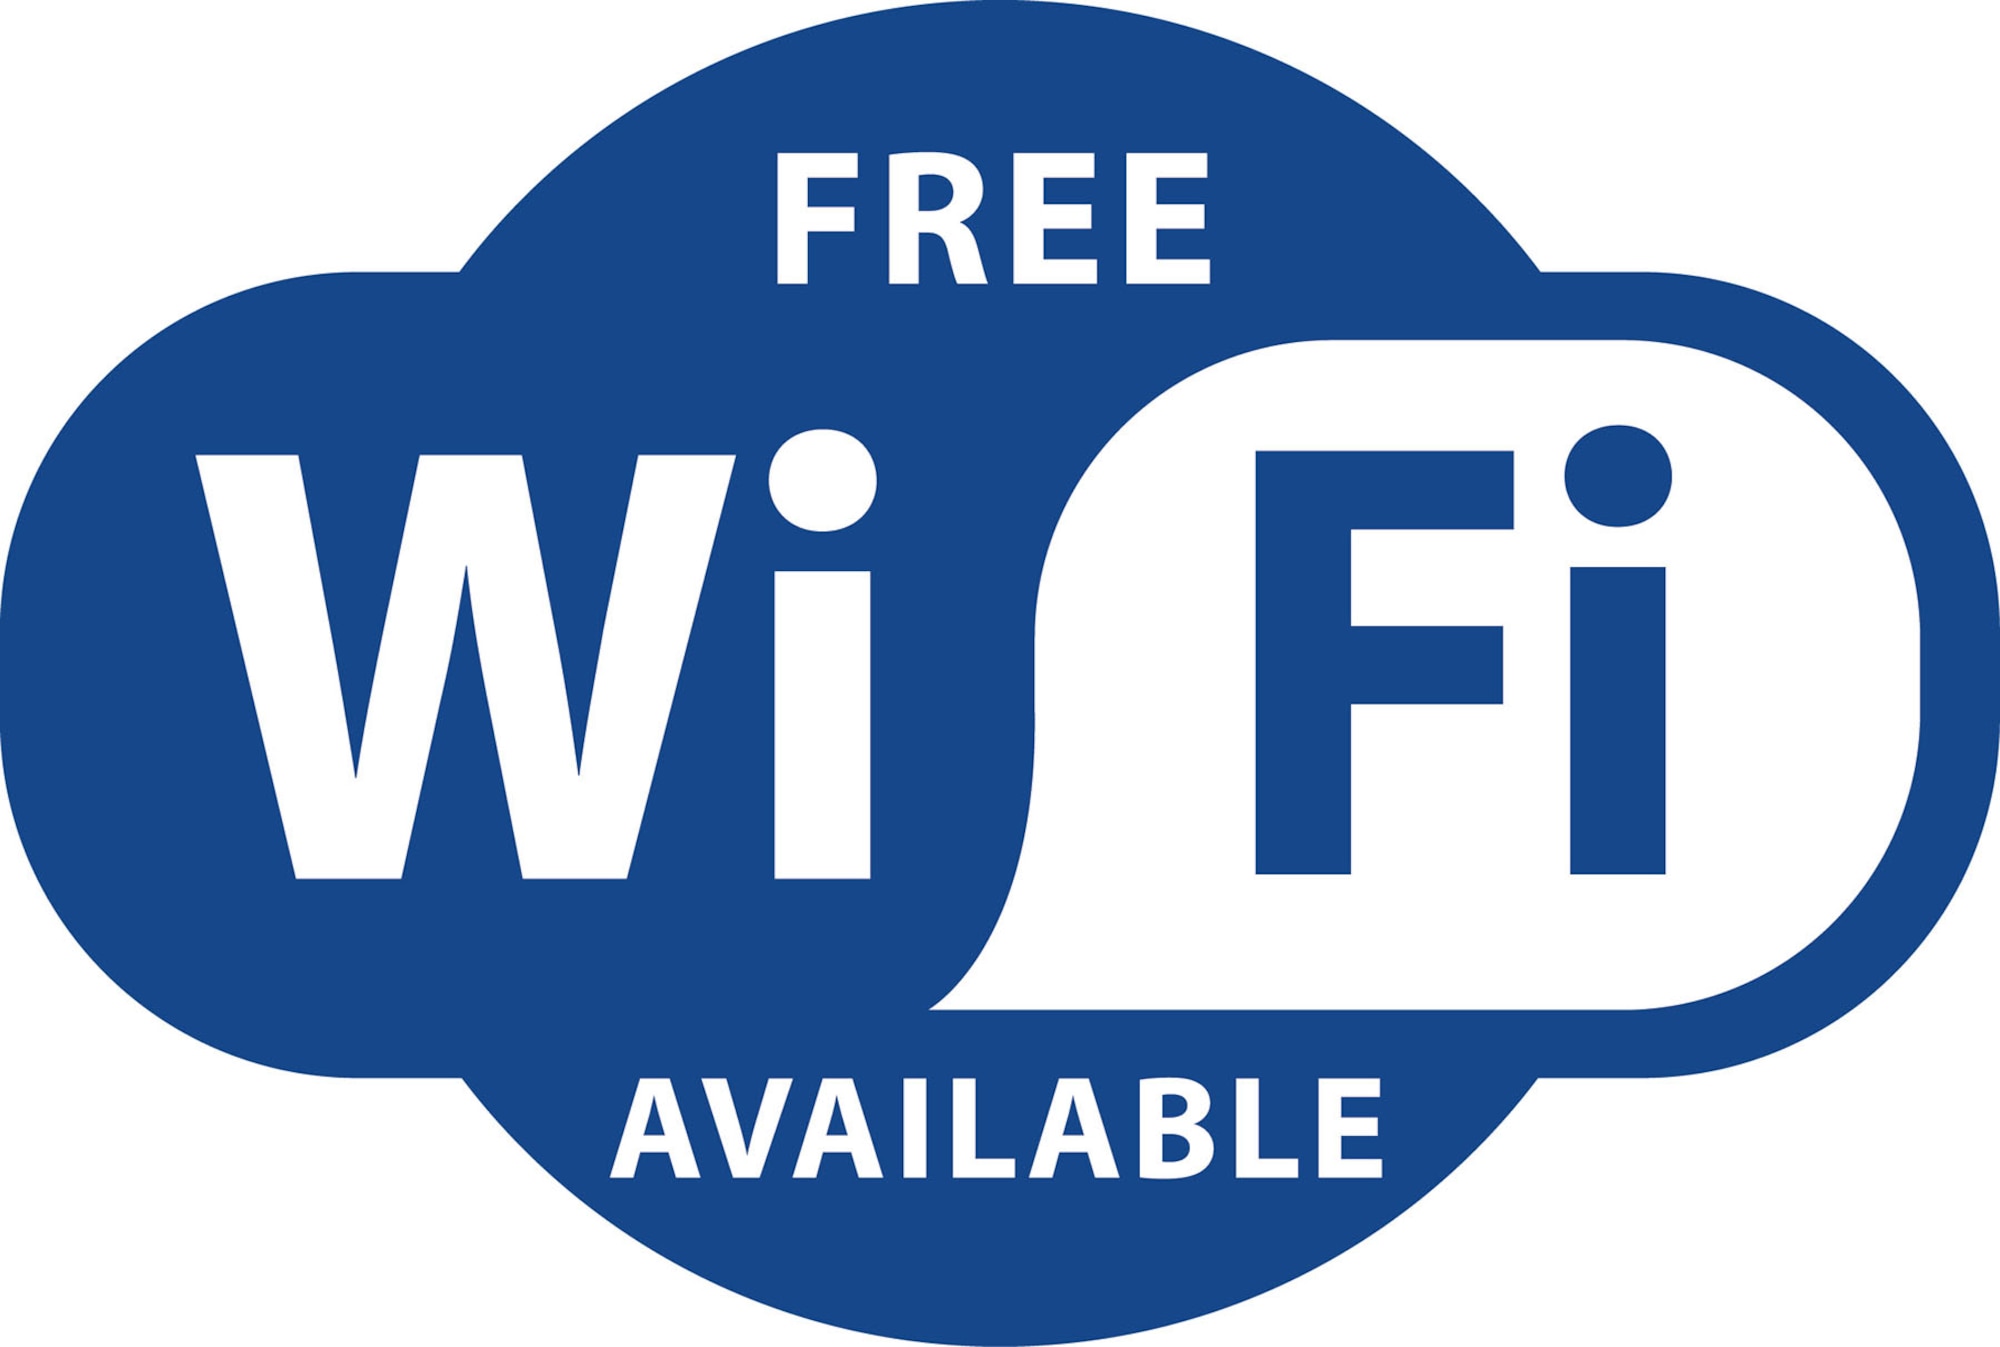 Provided by the Air Force Museum Foundation, free wireless Internet will be available to National Museum of the U.S. Air Force visitors free of charge throughout all galleries in the main museum complex, as well as the lobby and café. (U.S. Air Force graphic)